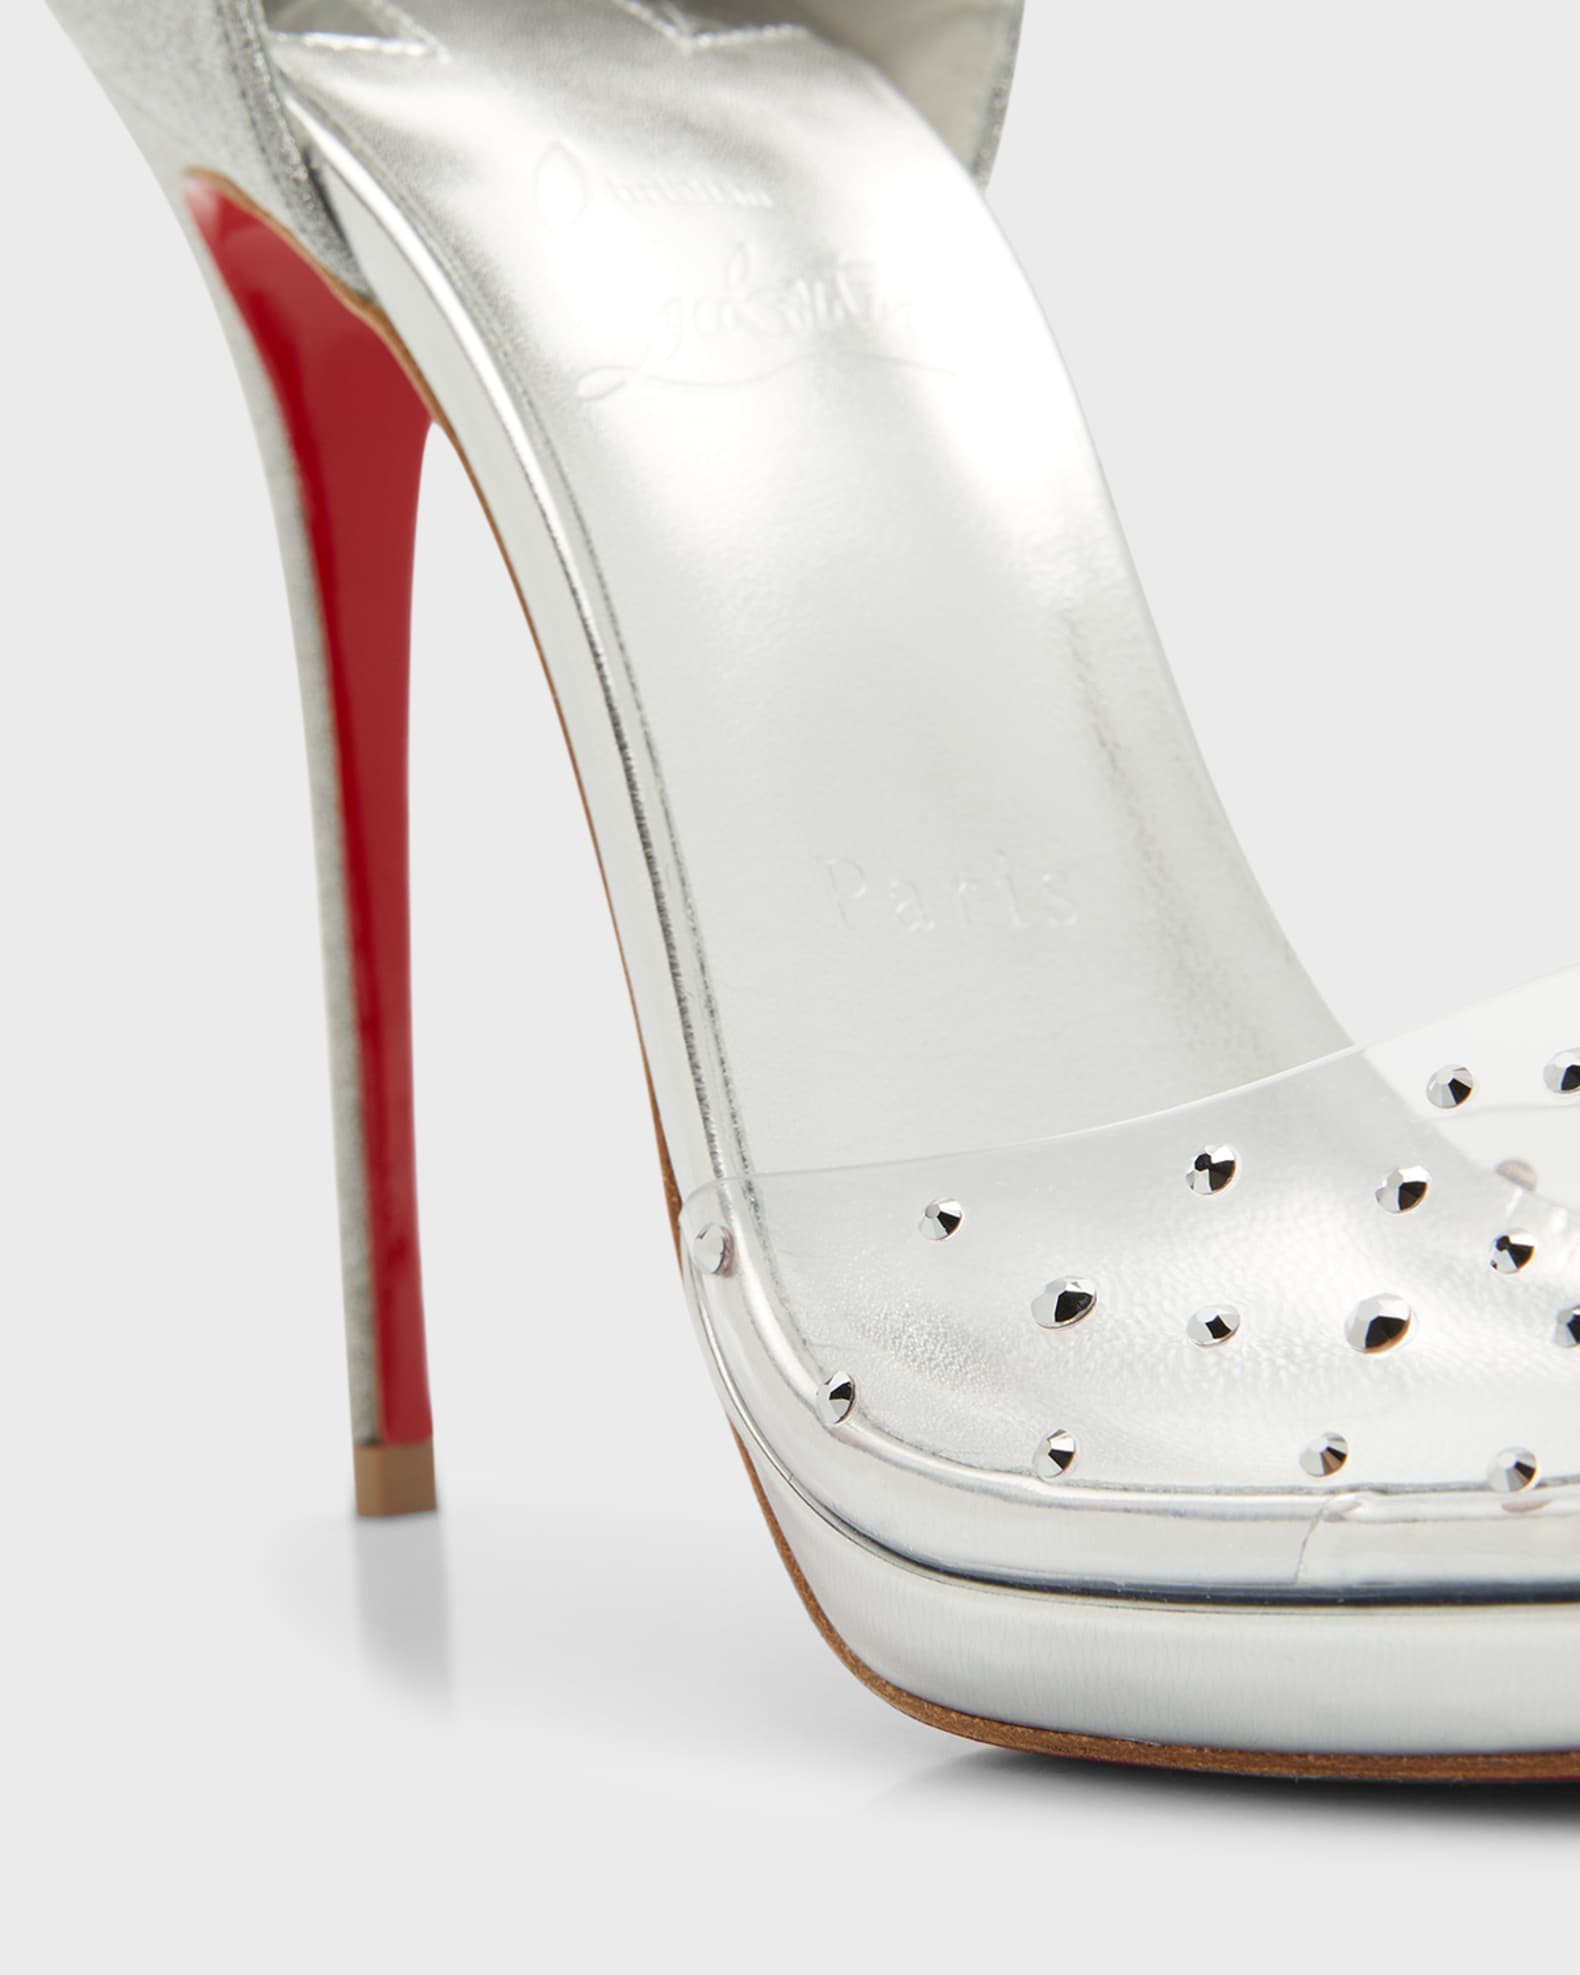 Christian Louboutin Degratina Frou Red Sole Embellished Stiletto Sandals Neiman Marcus